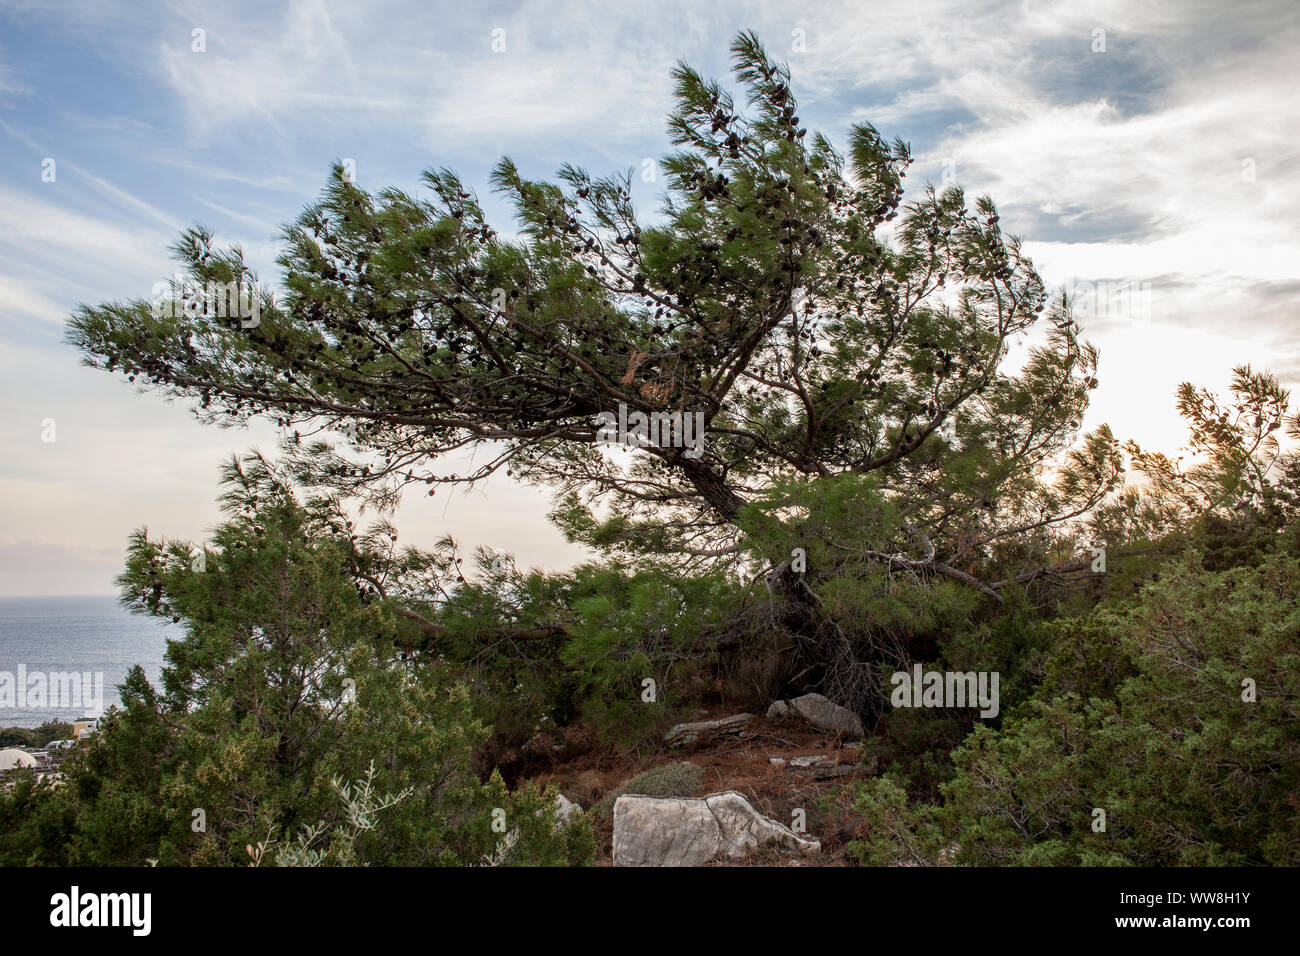 Pine tree leaning towards sea, South of Bodrum, Turkey, Stock Photo